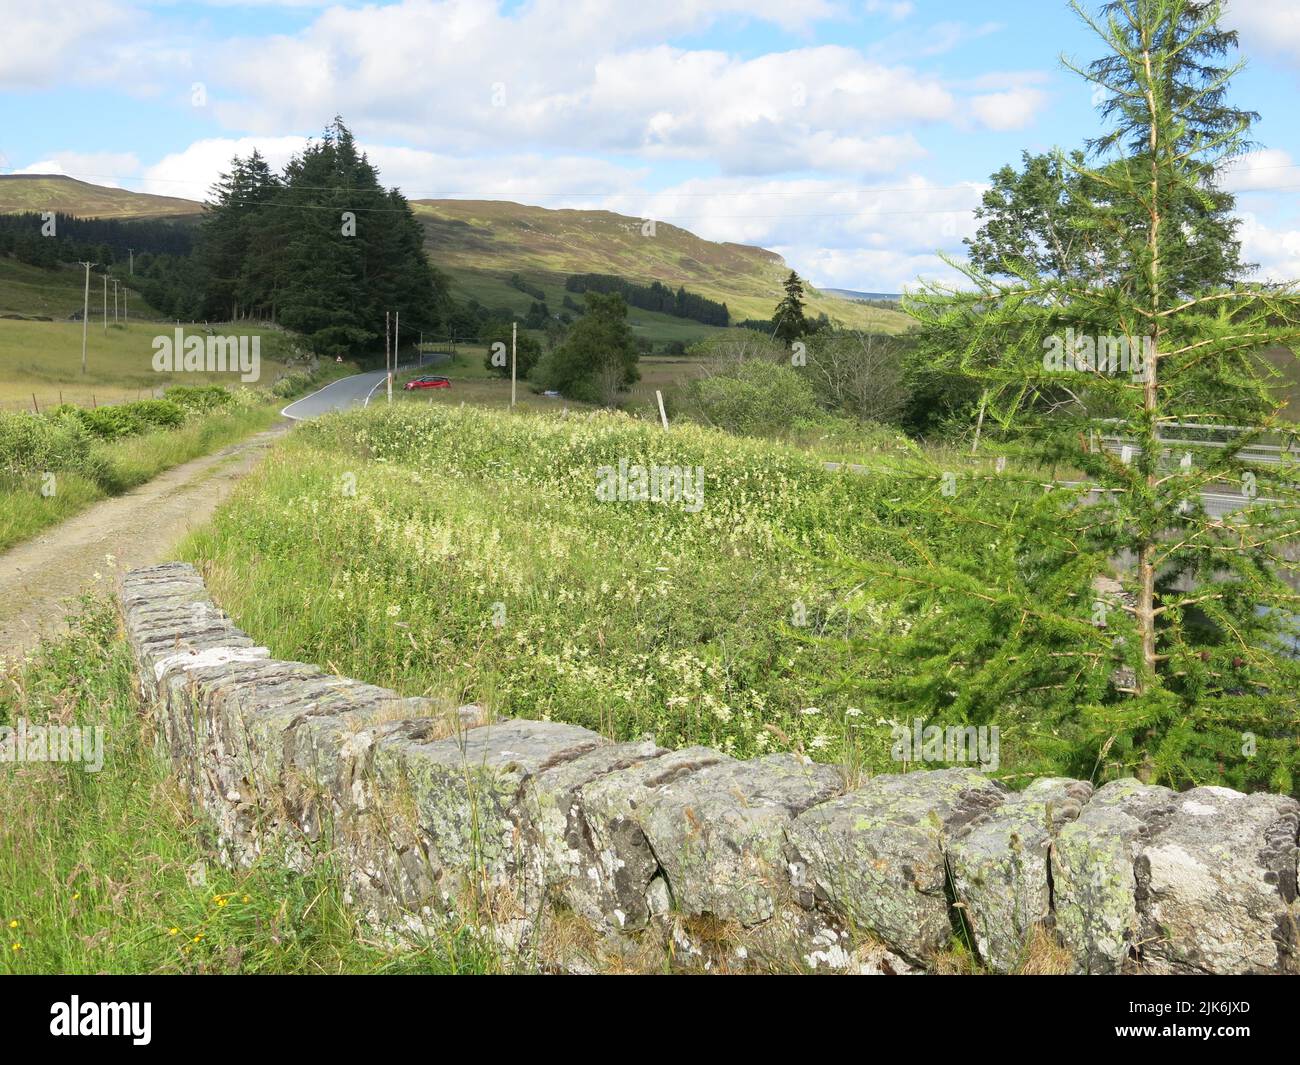 The gentle Highlands scenery of the glens of Strathardle in central Perthshire: take a road trip along the A924 between Blairgowrie and Pitlochry. Stock Photo